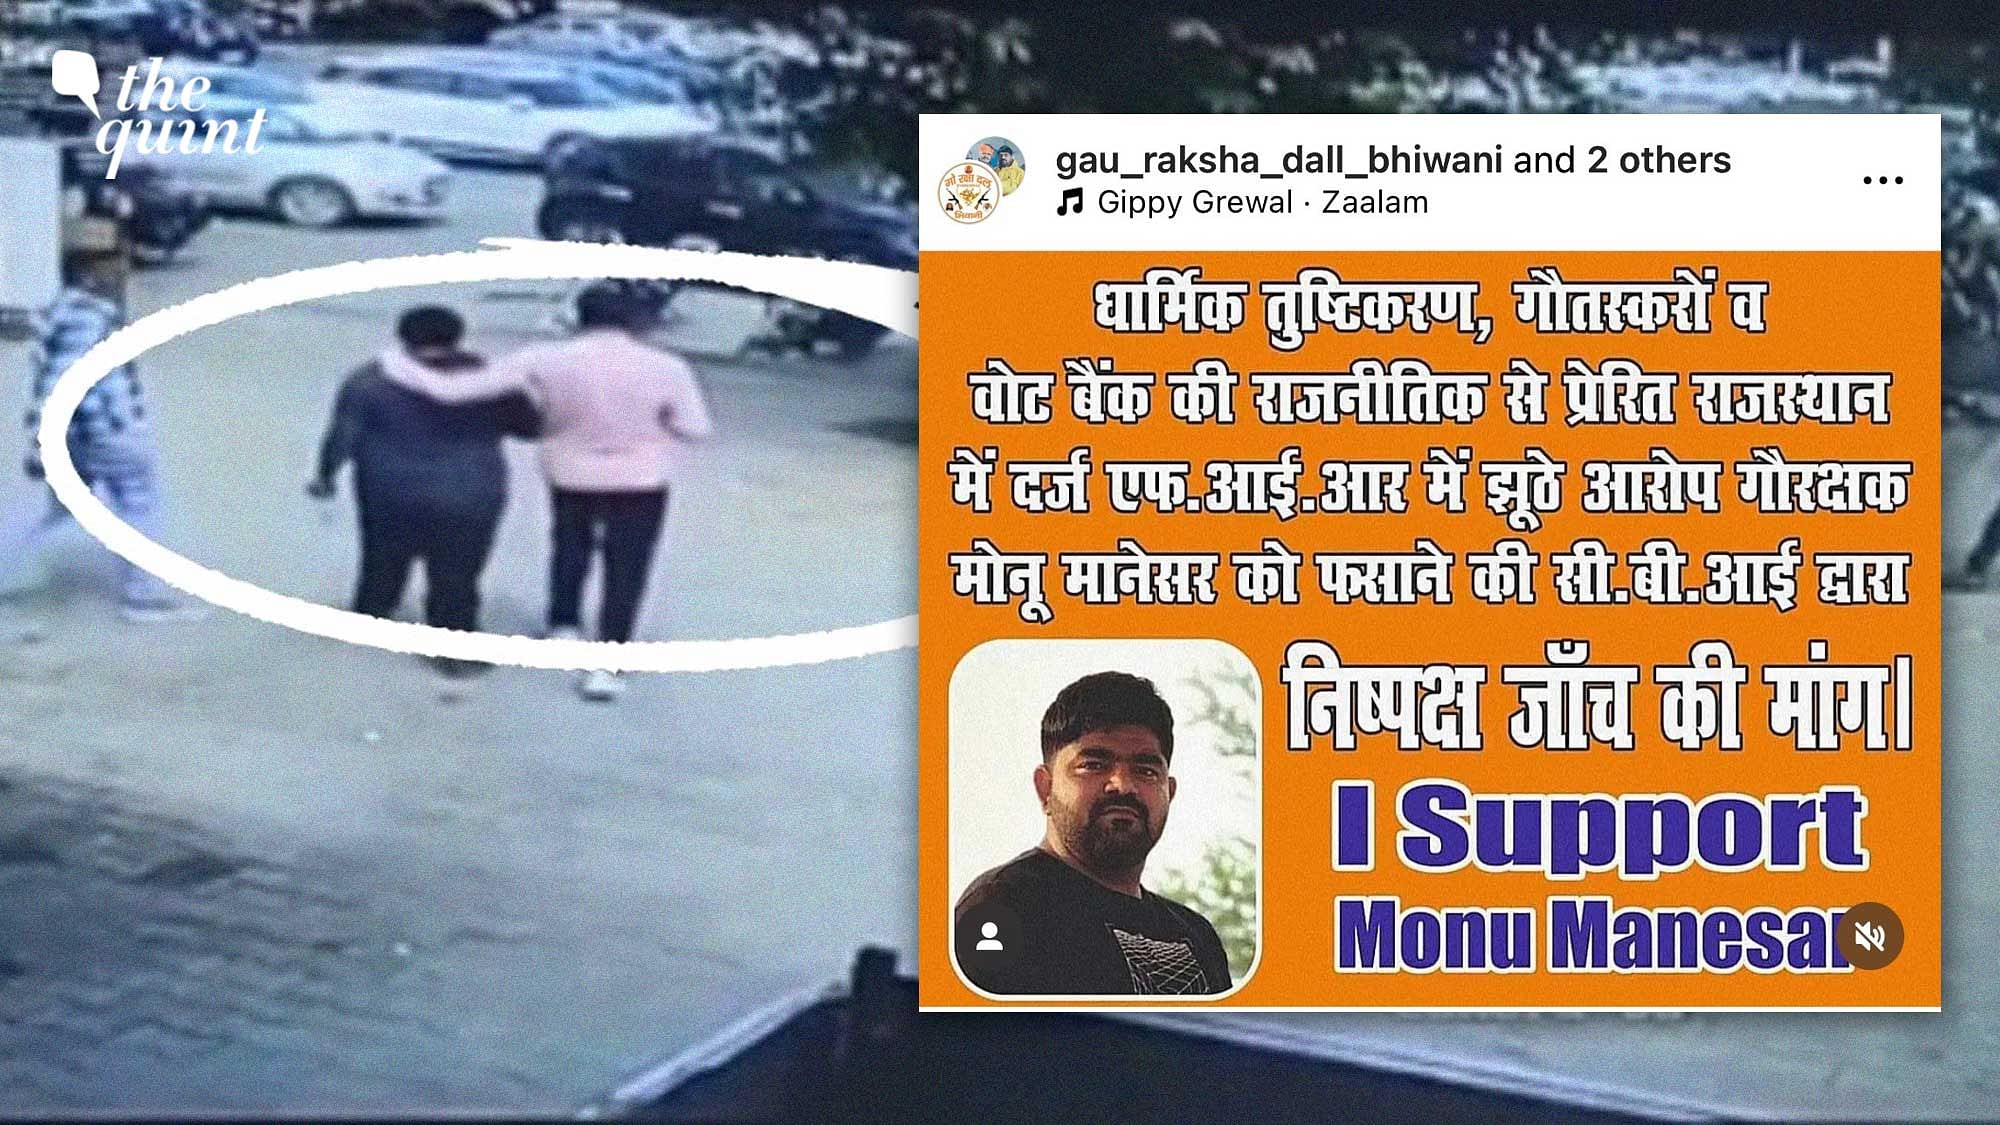 <div class="paragraphs"><p>Bajrang Dal has come out in support for Monu Manesar, following his arrest.&nbsp;</p></div>